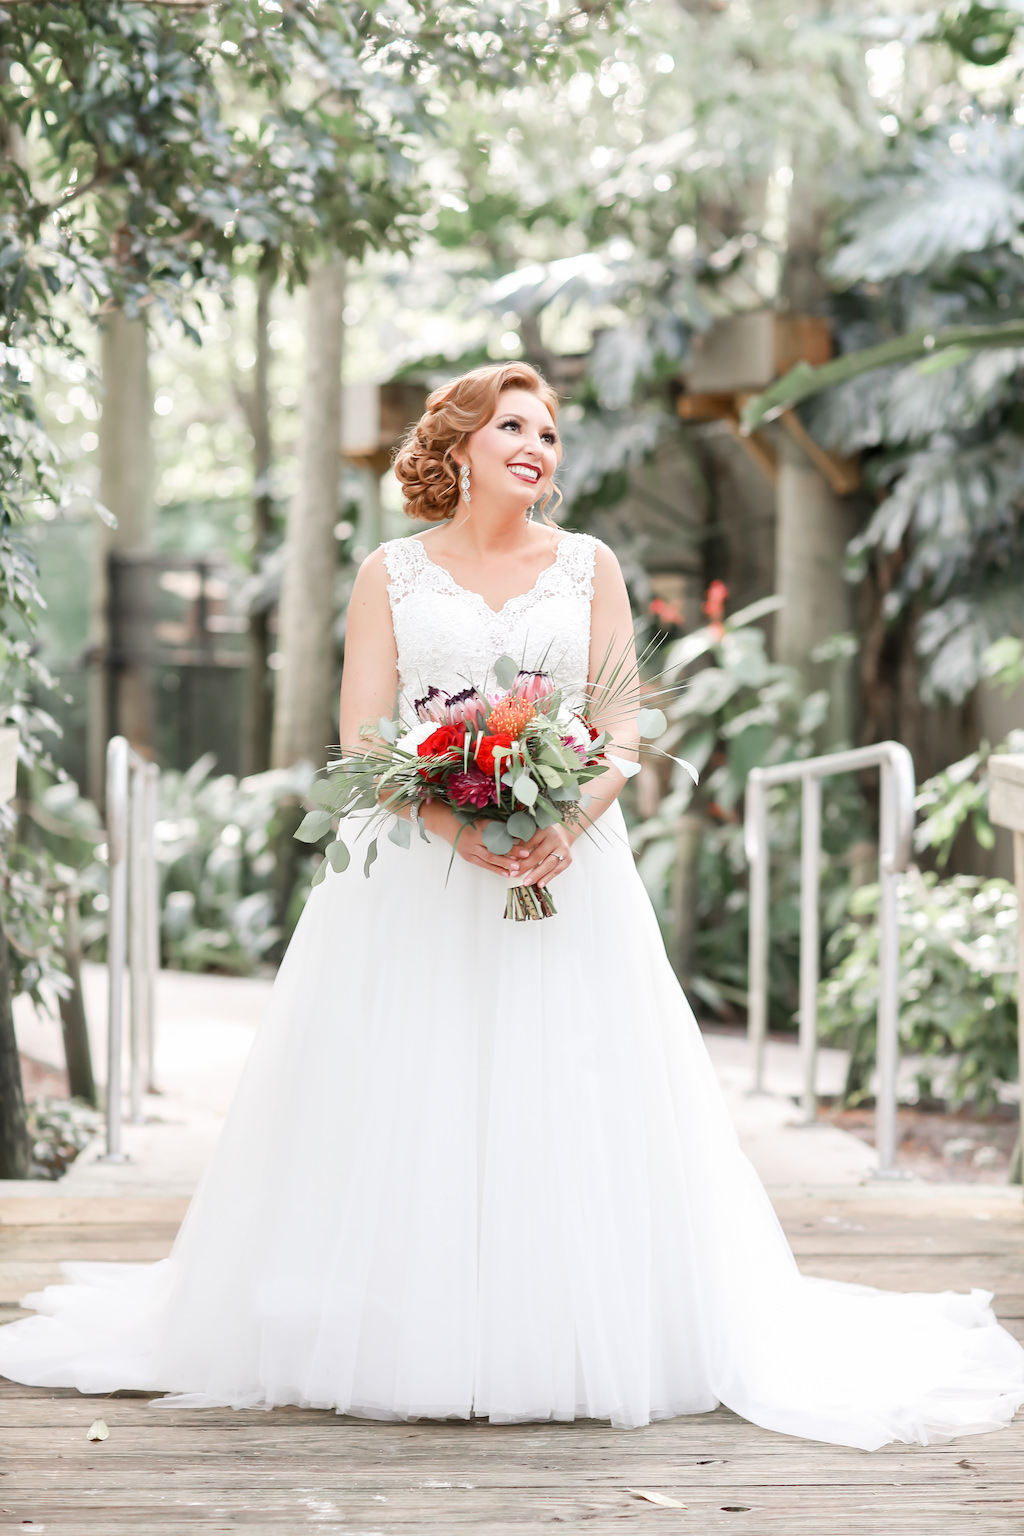 Outdoor Florida Bride Wedding Portrait in V Neckline Tank Top Strap Lace and Illusion Bodice and Ballgown Skirt Wedding Dress with Tropical Inspired, Red, Orange, and Greenery Floral Bouquet | Tampa Bay Wedding Photographer Lifelong Photography Studio | Hair and Makeup Michele Renee the Studio